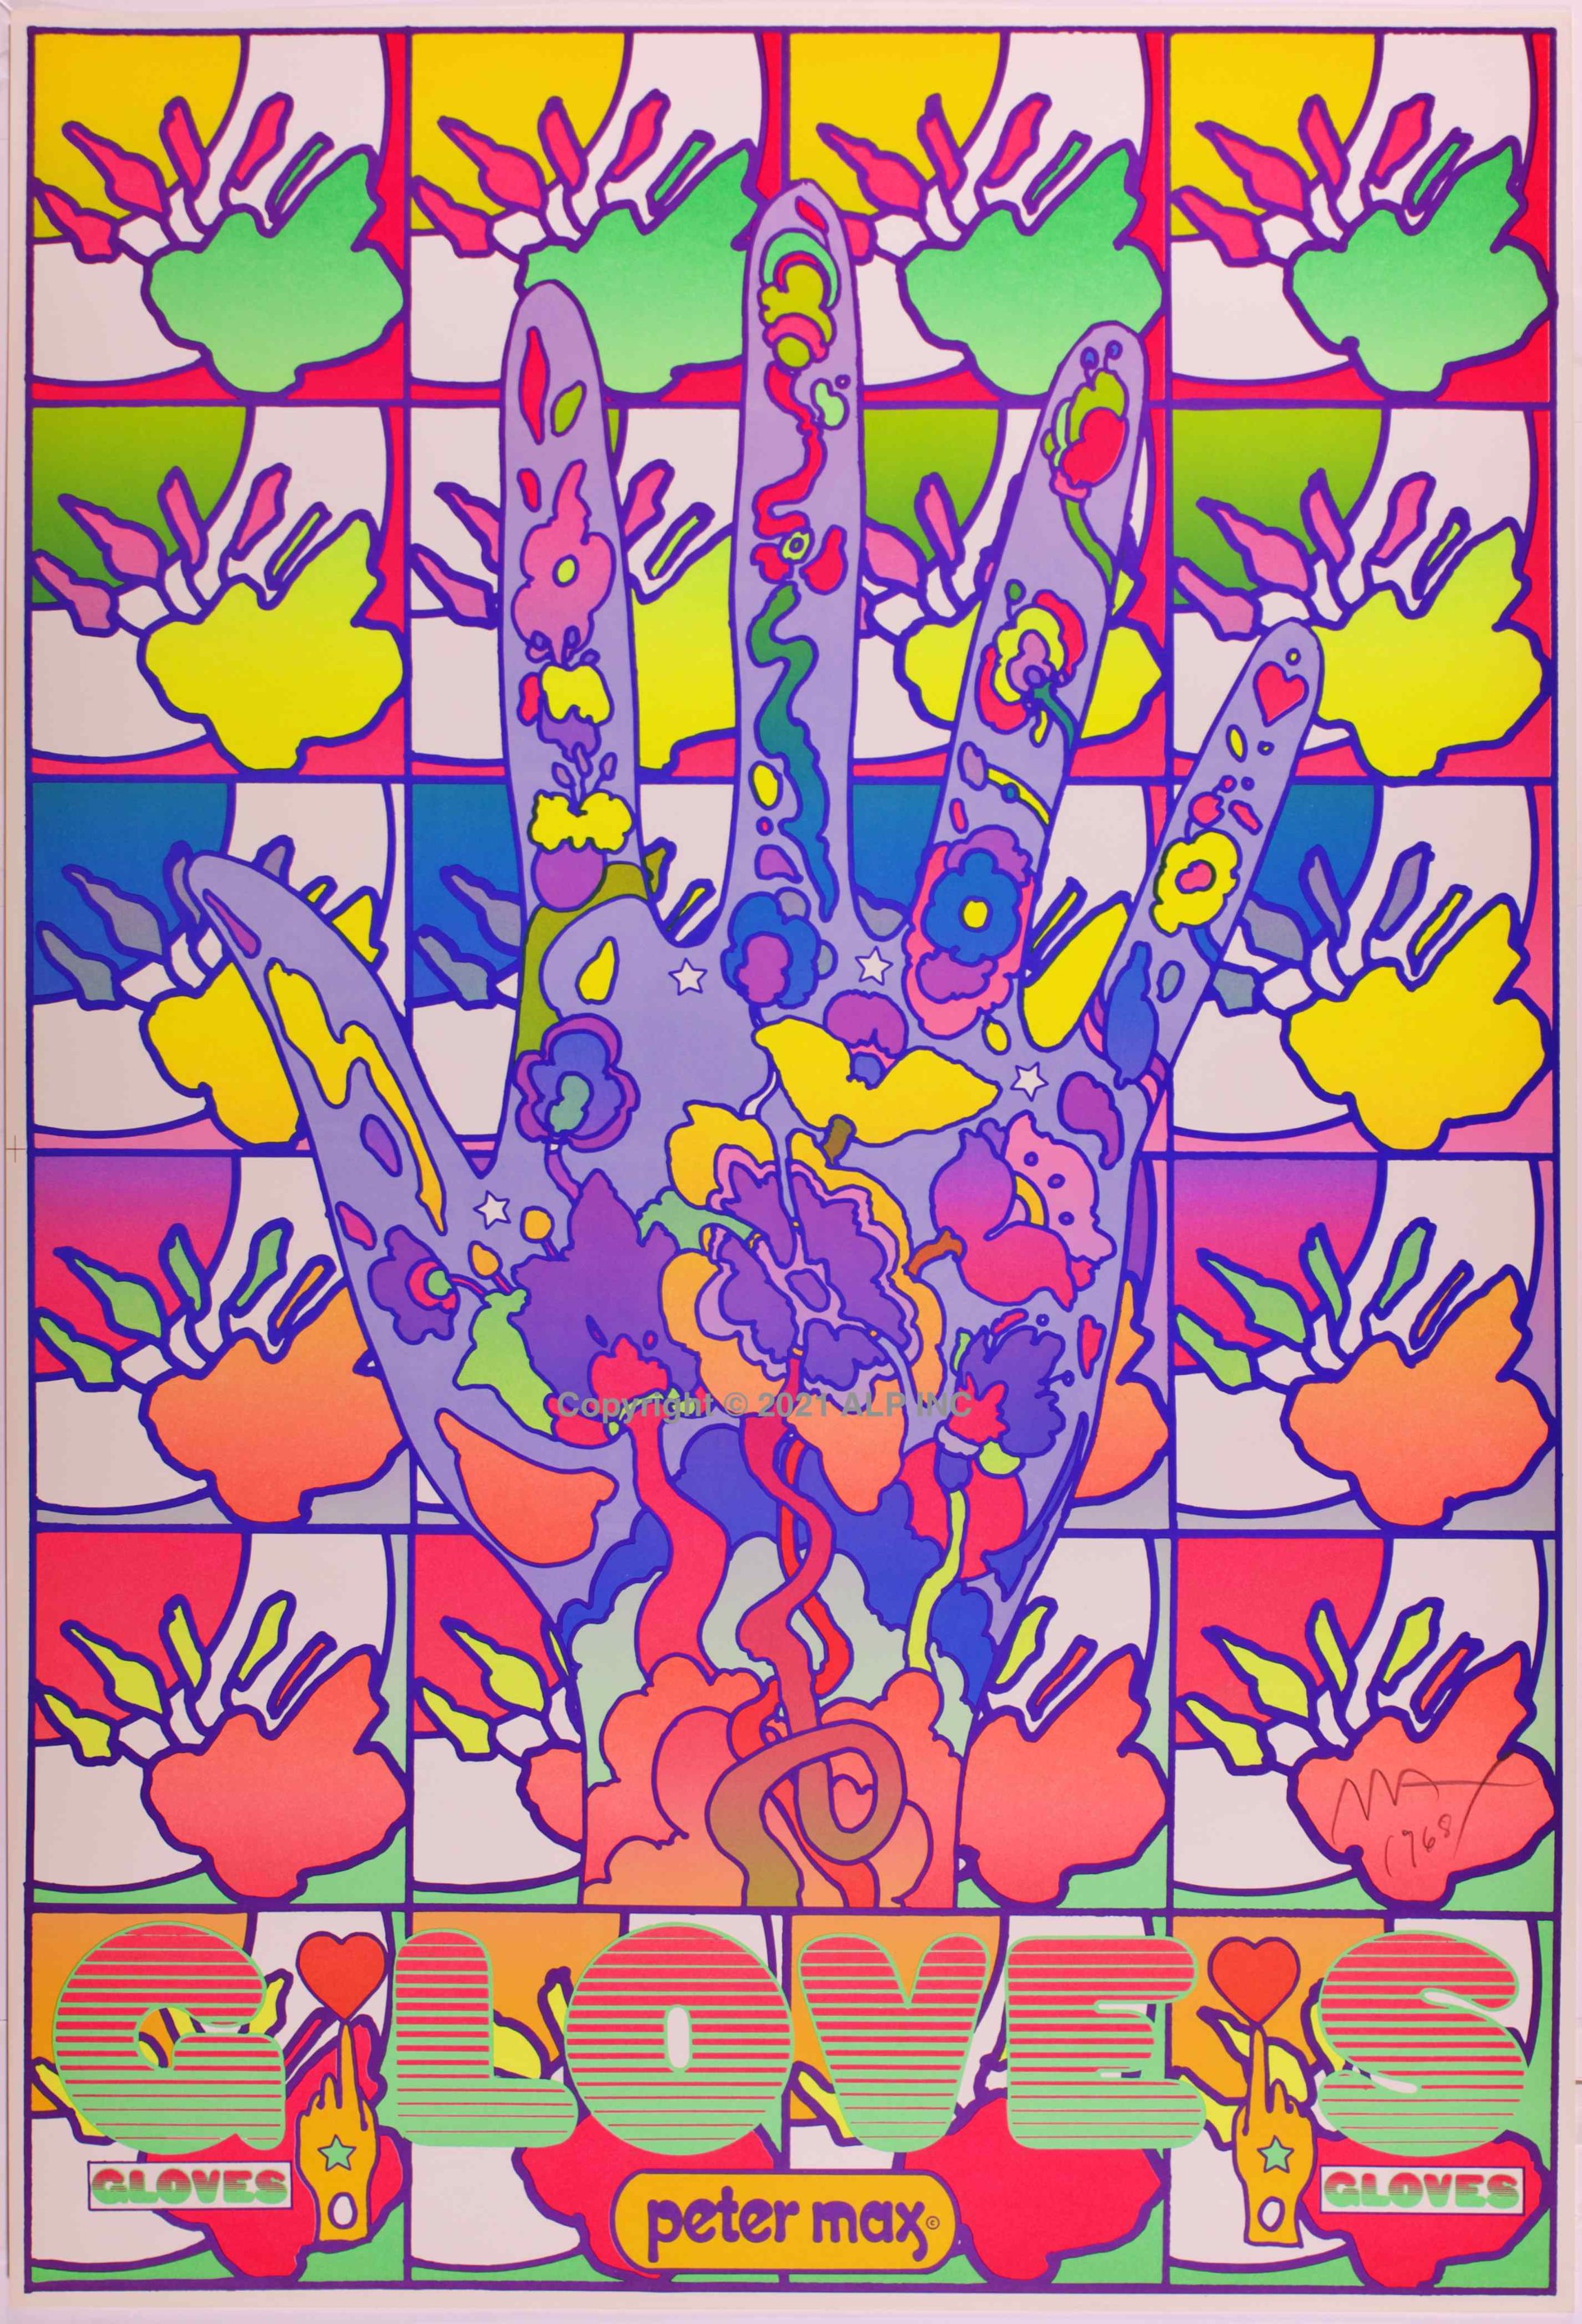 Gloves by Peter Max